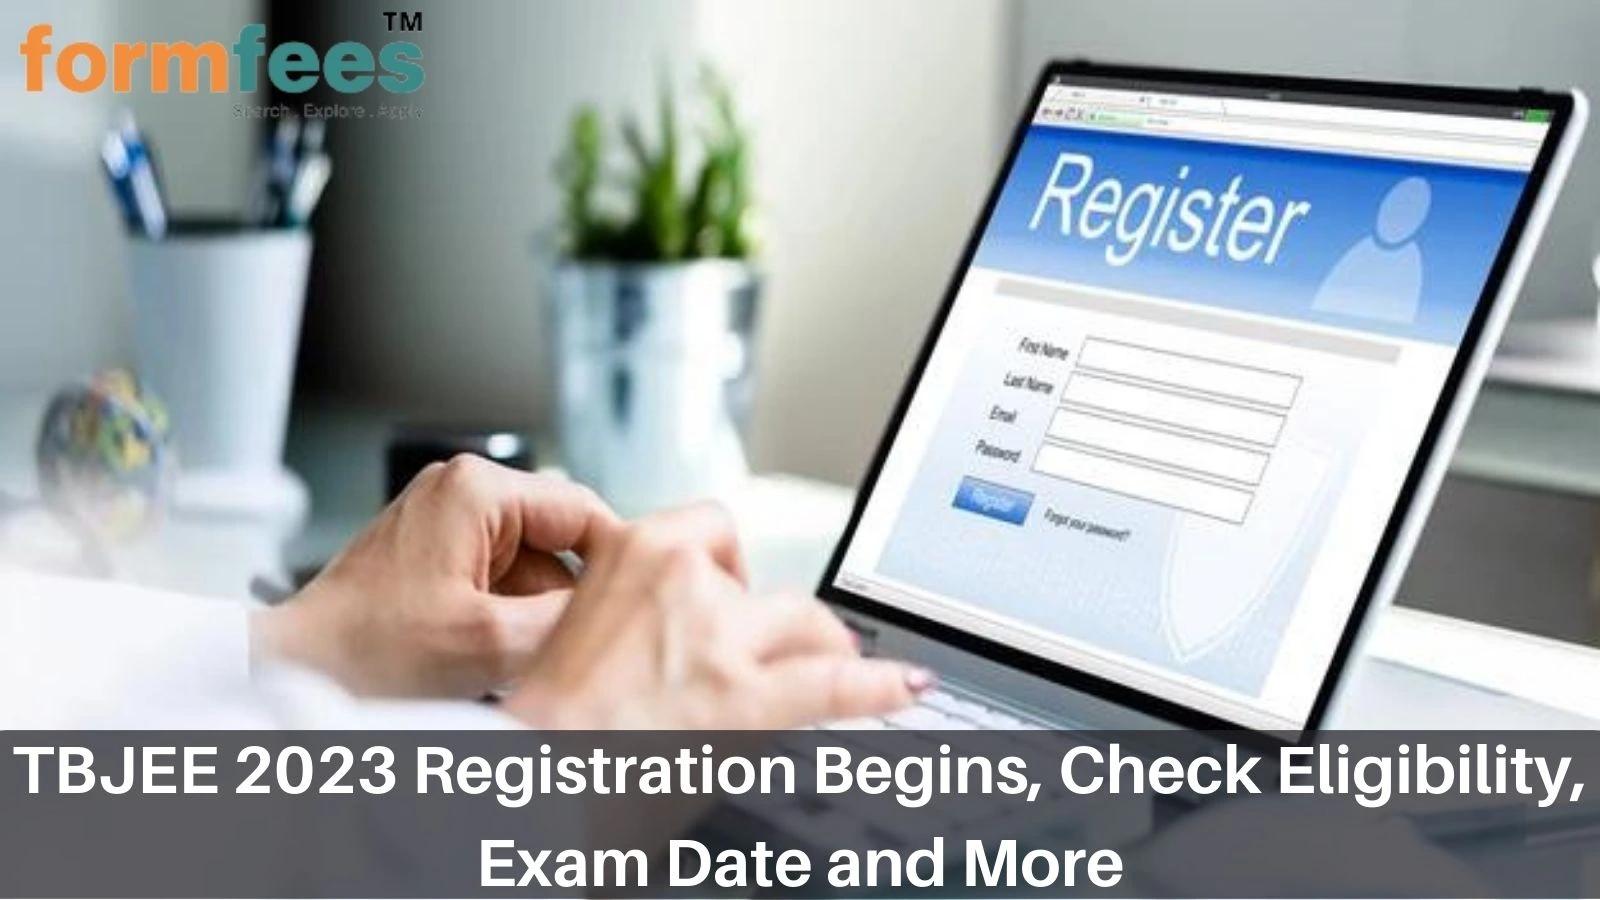 TBJEE 2023 Registration Begins, Check Eligibility, Exam Date and More